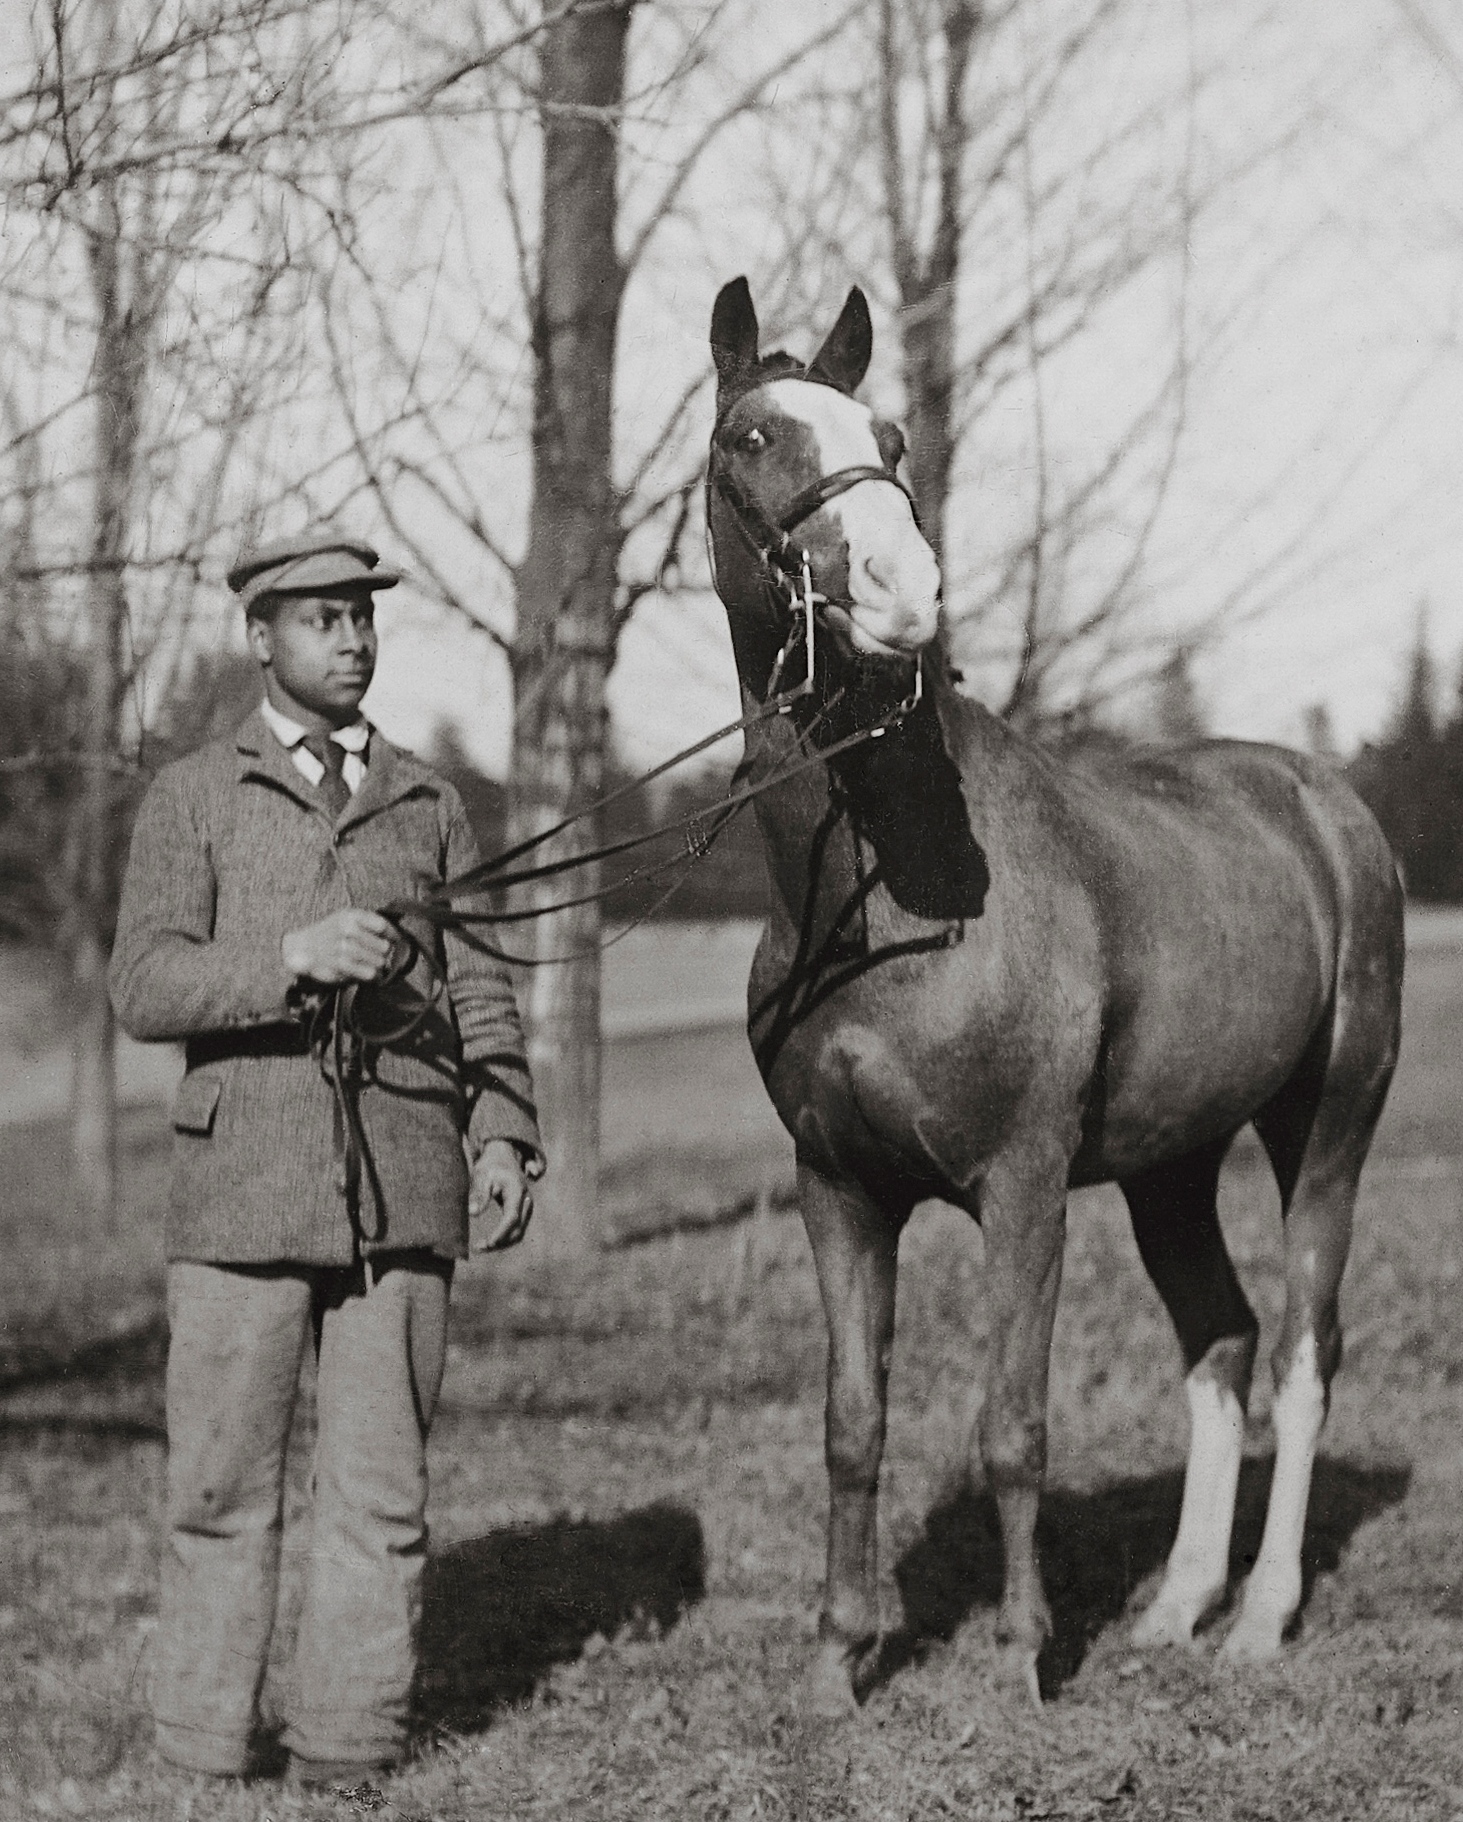 Black and white photograph of an African American man in his twenties in coat, tie, and hat, holding the reins of a horse outside.